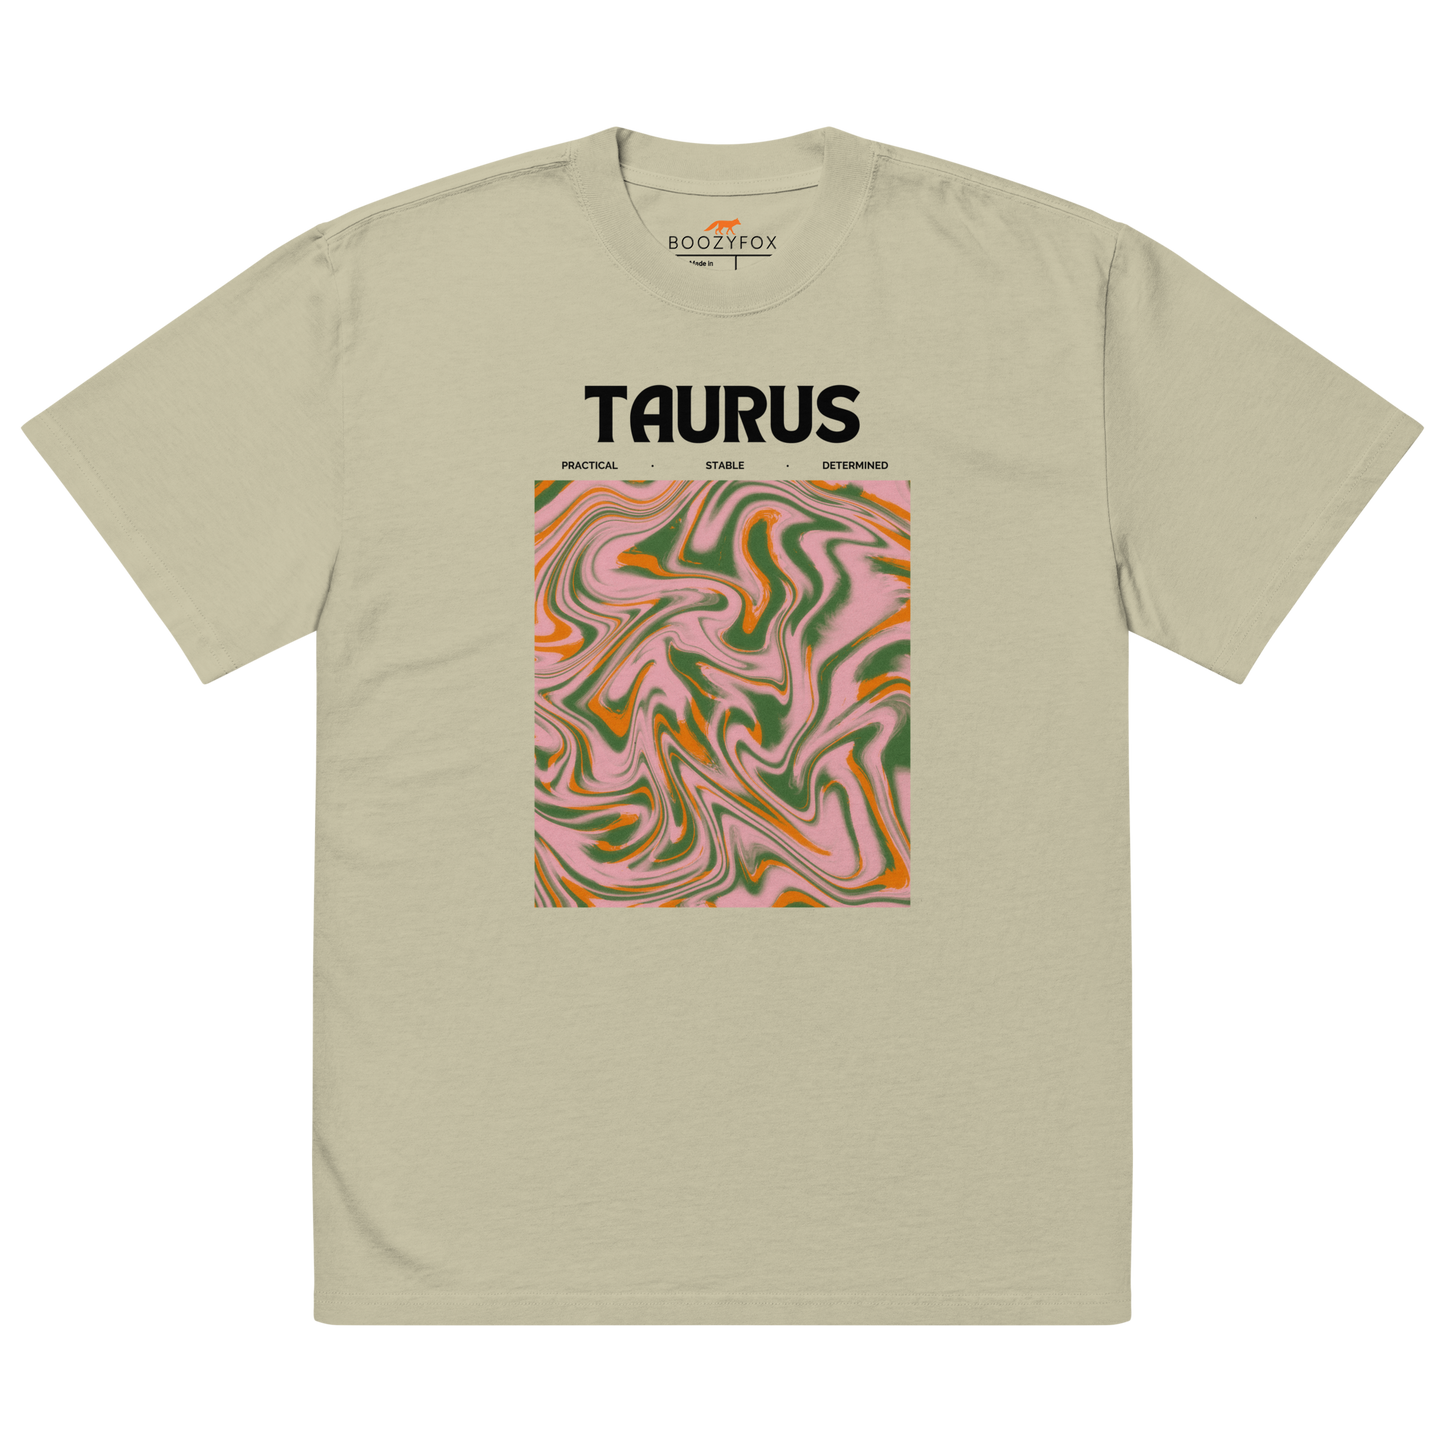 Faded Eucalyptus Taurus Oversized T-Shirt featuring an Abstract Taurus Star Sign graphic on the chest - Cool Graphic Zodiac Oversized Tees - Boozy Fox